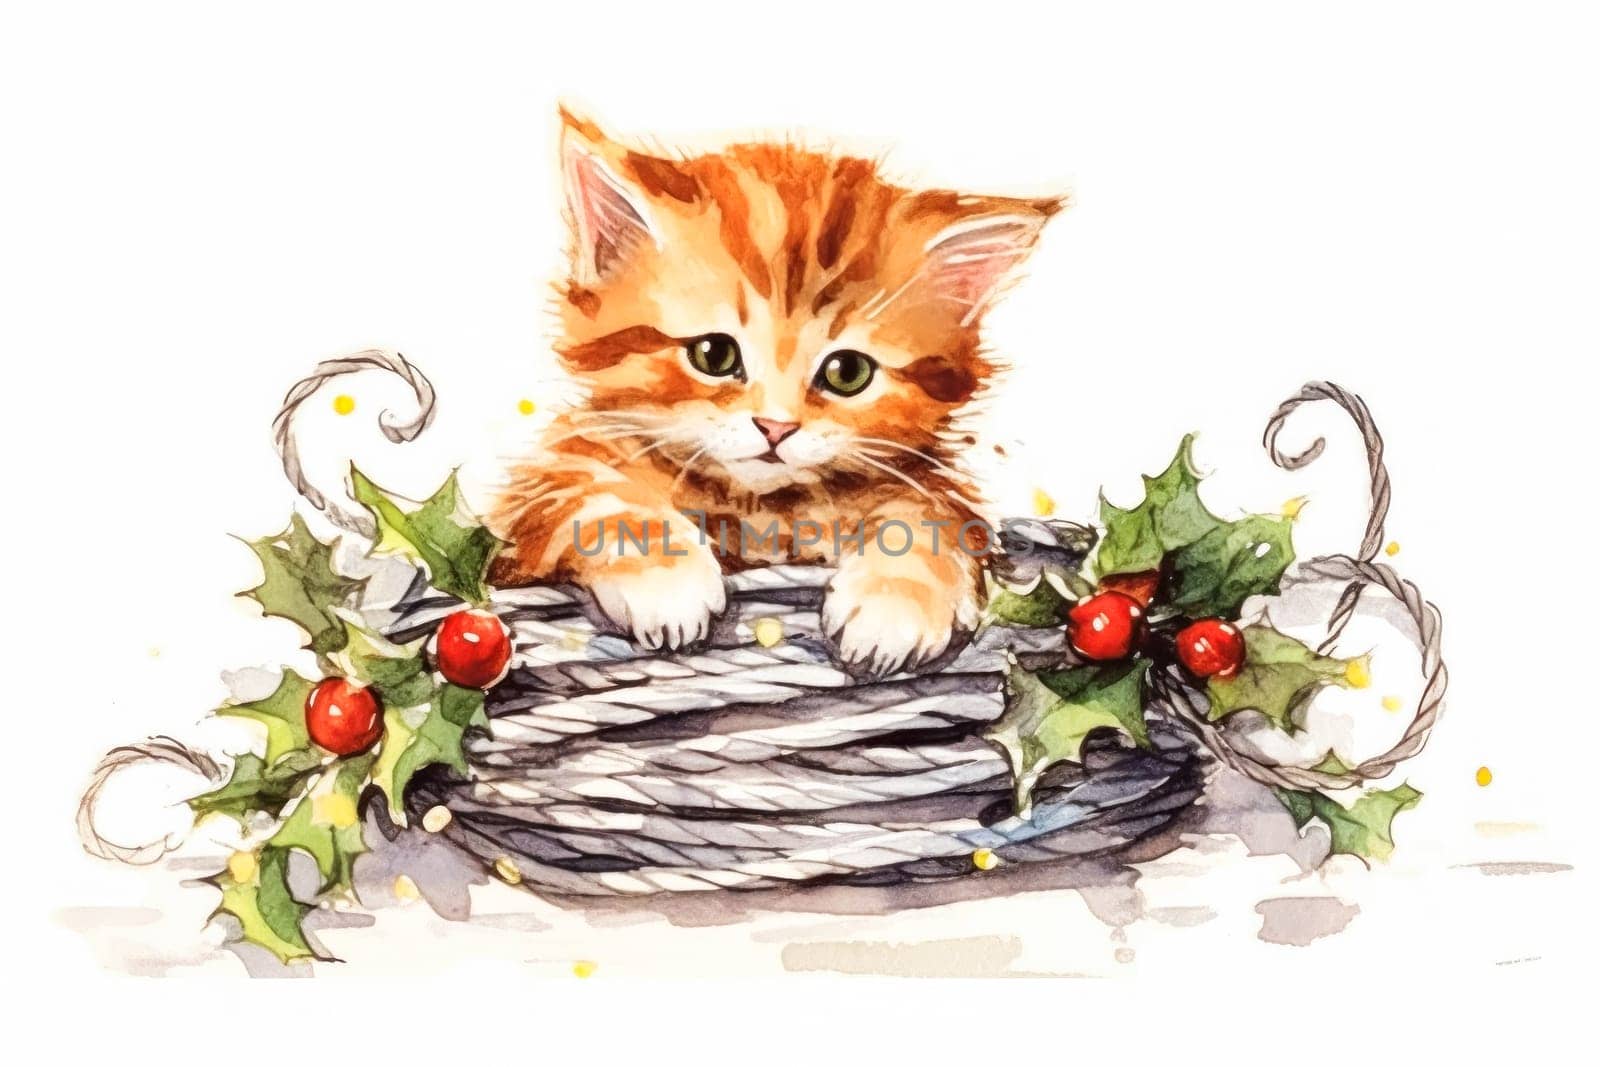 watercolor masterpiece adorable kitten amidst Christmas decorations, capturing the joy of celebrating Christmas and New Year.